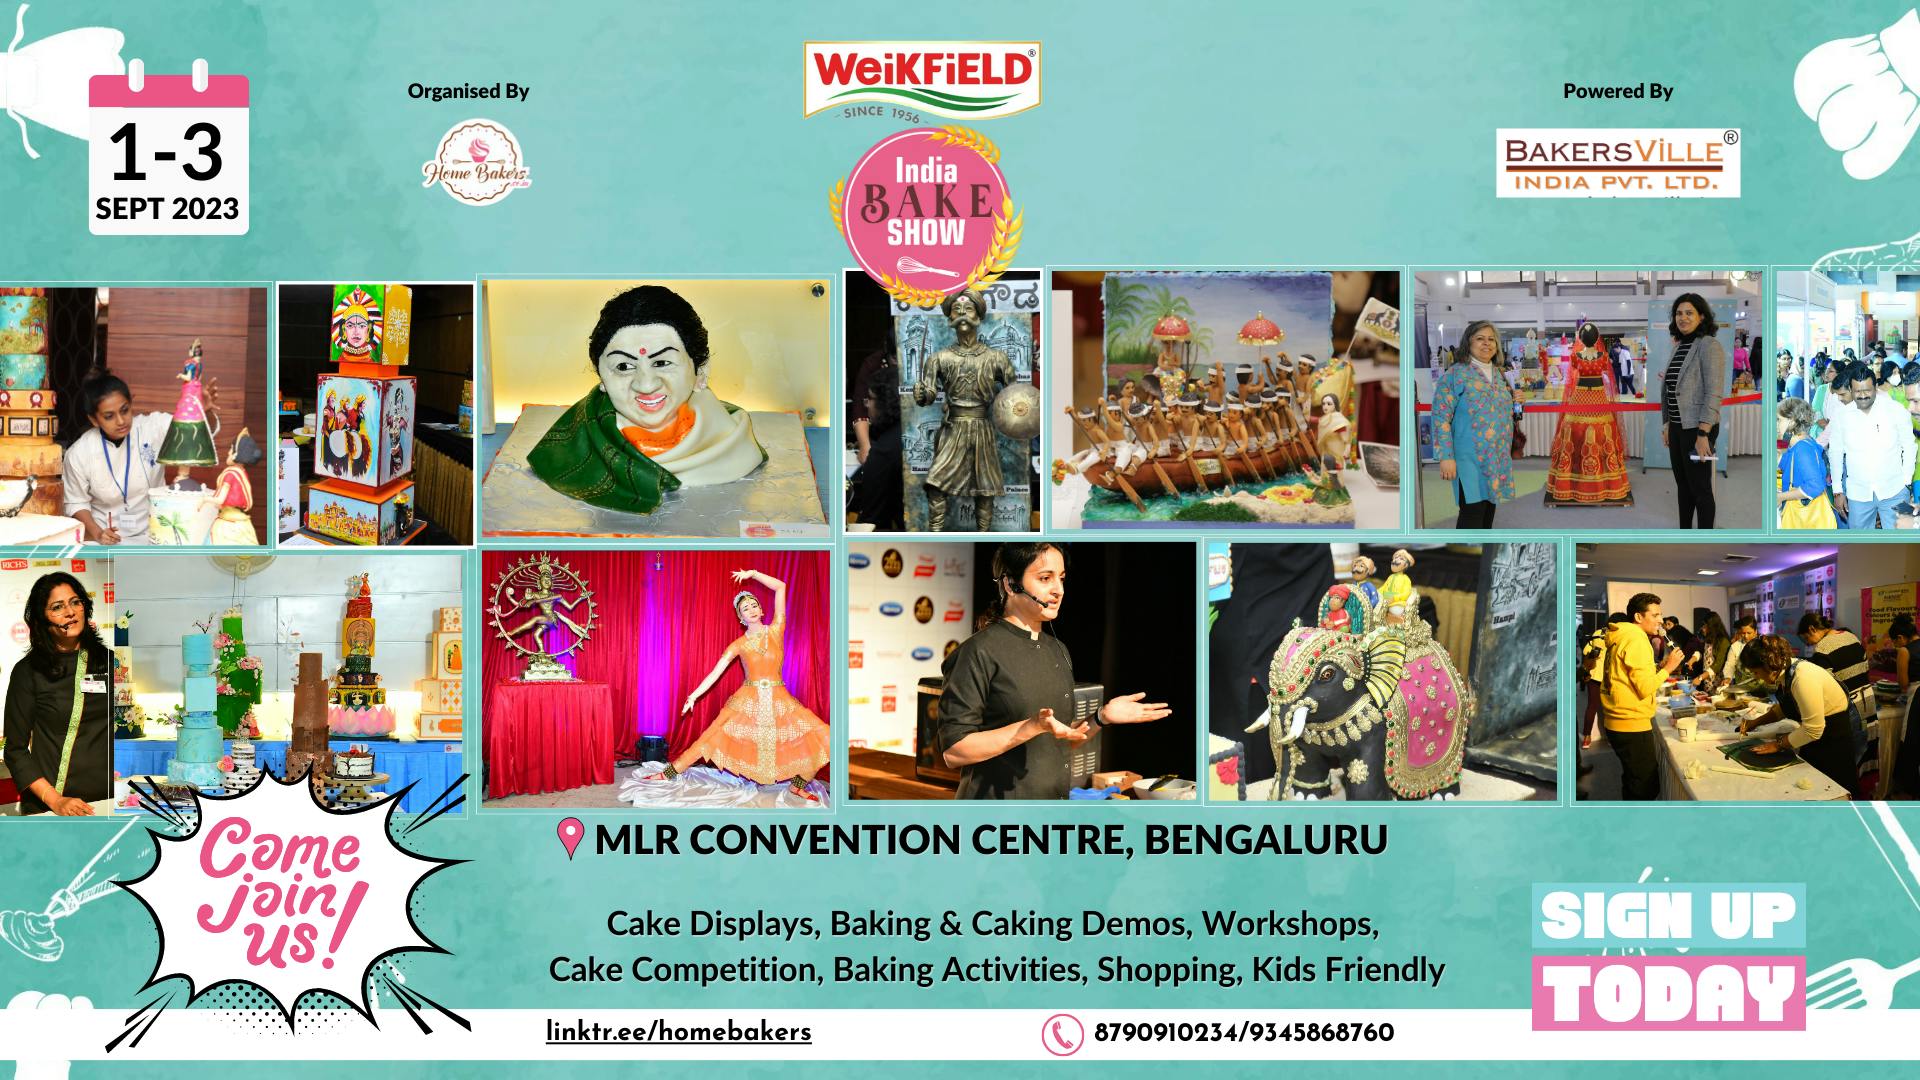 The 43rd Annual Bangalore Cake Show Is Underway!